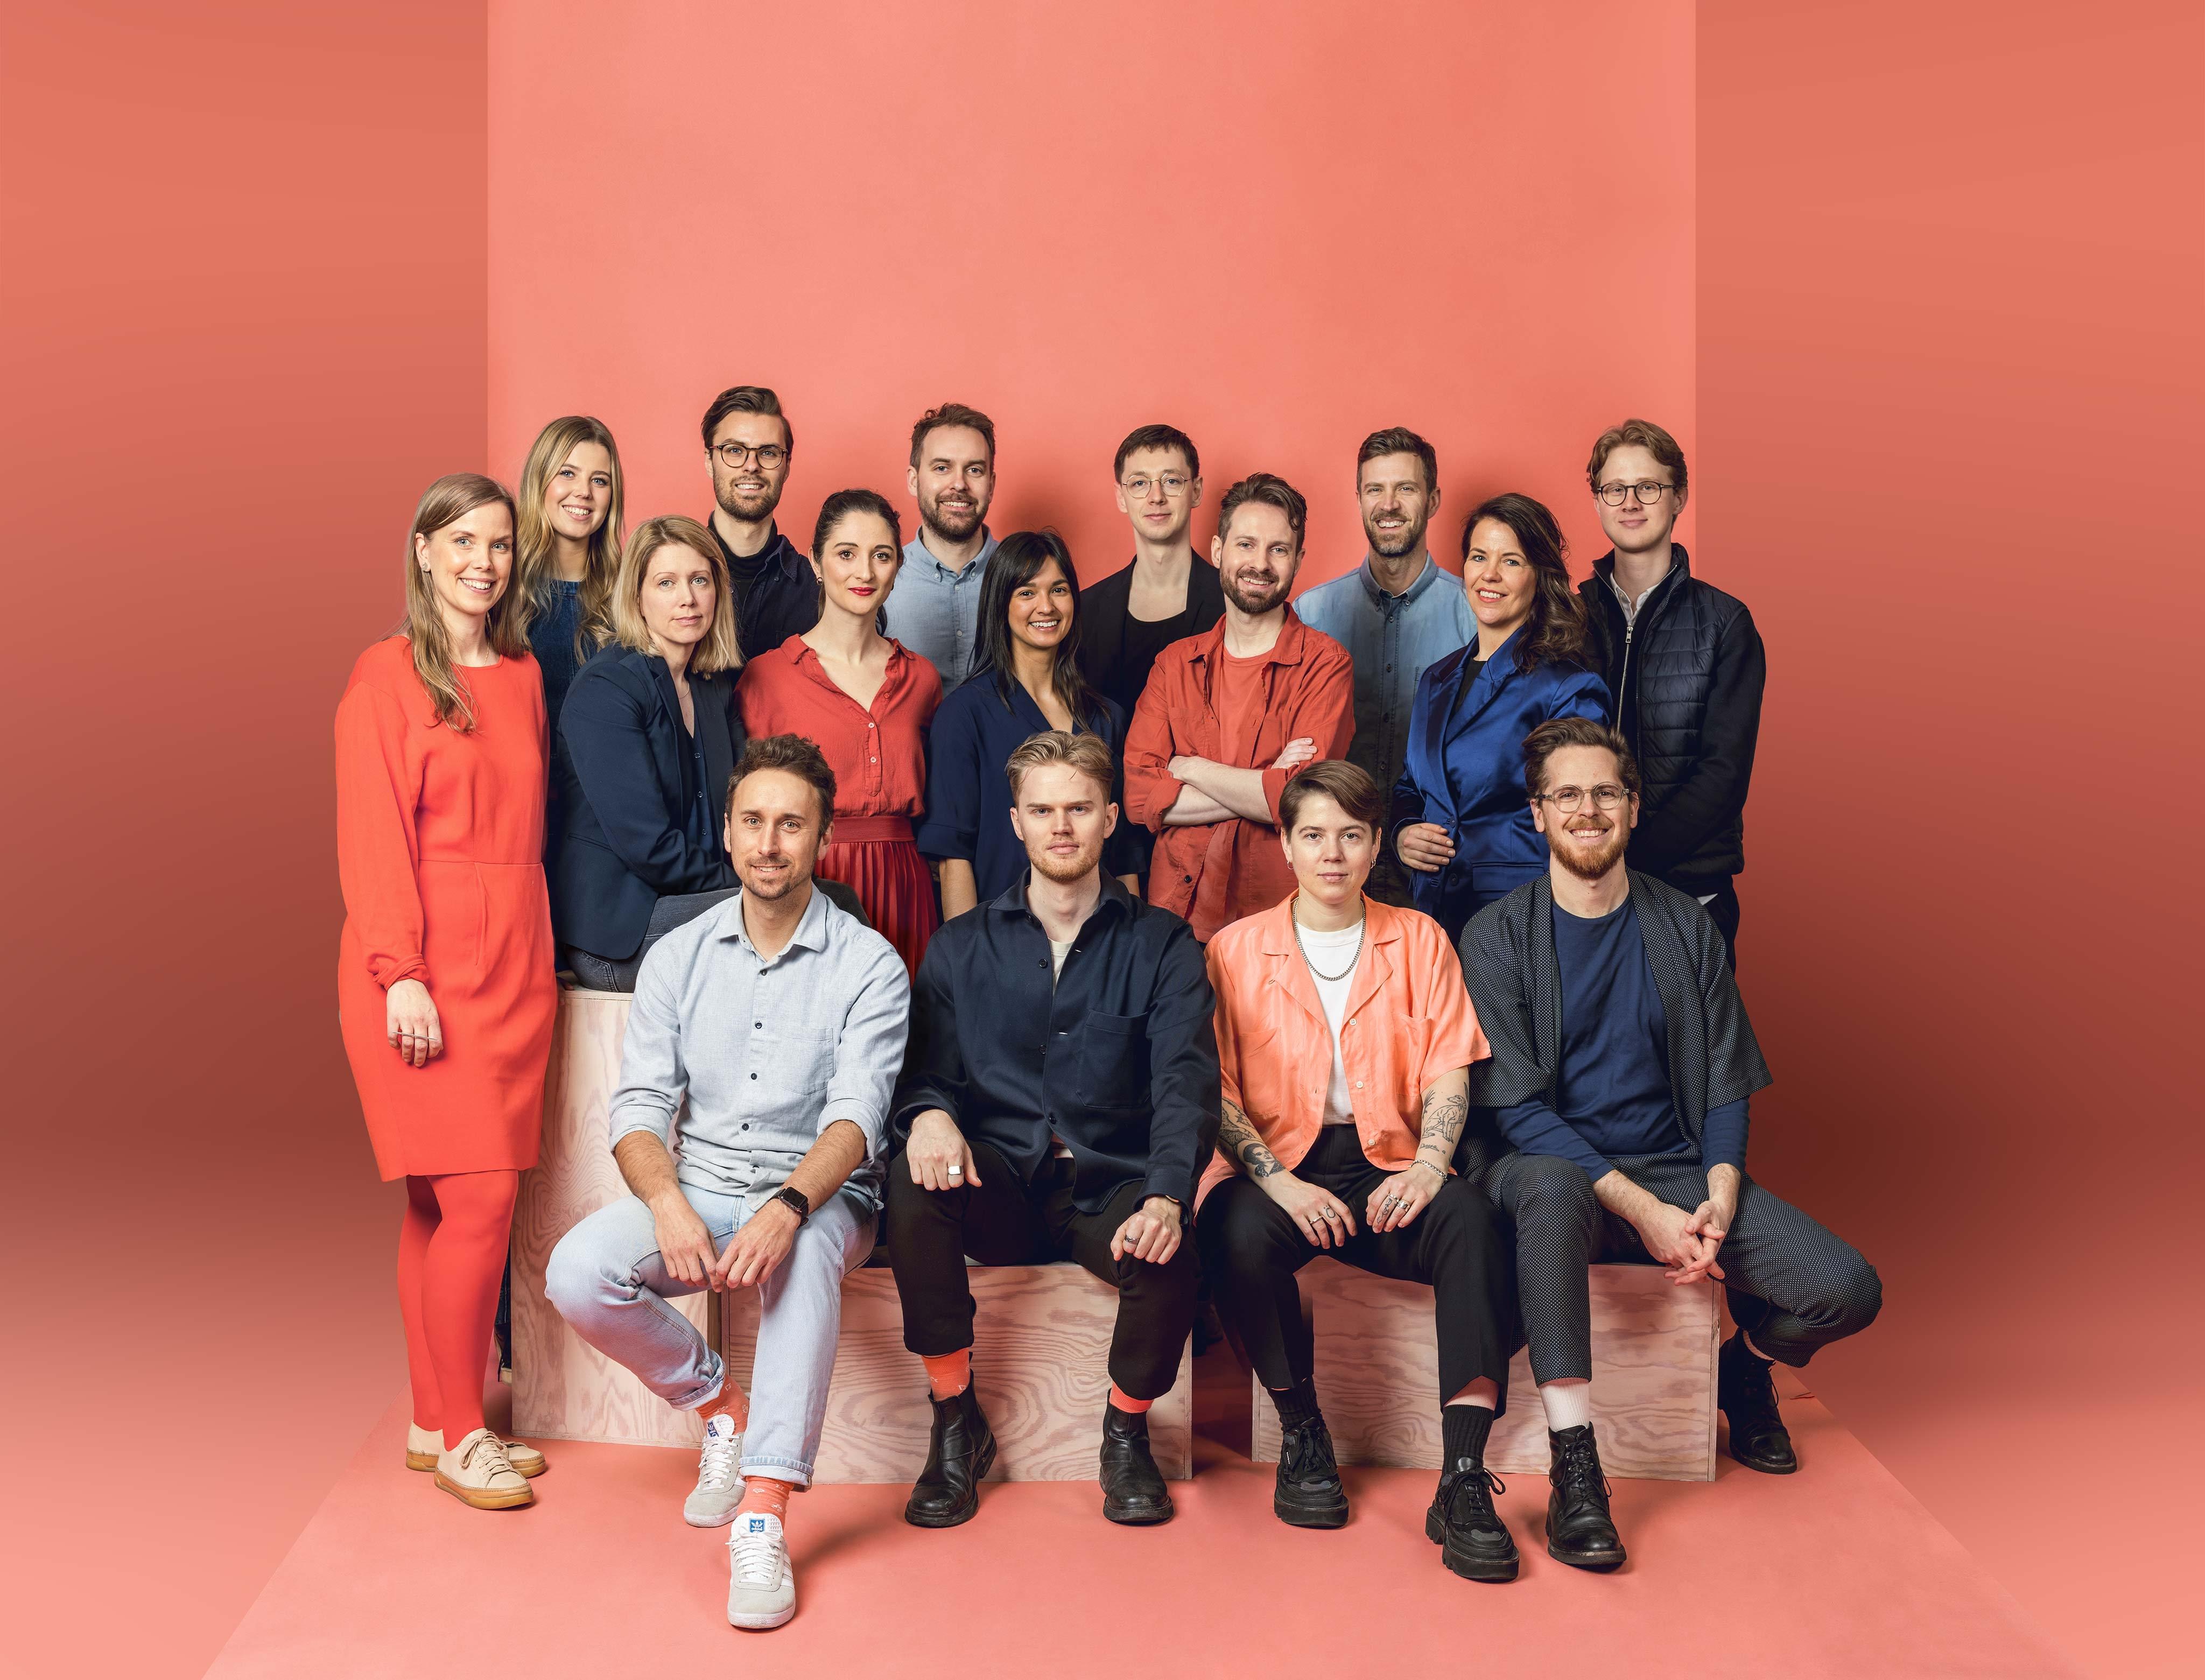 Group photo of Boid's employees